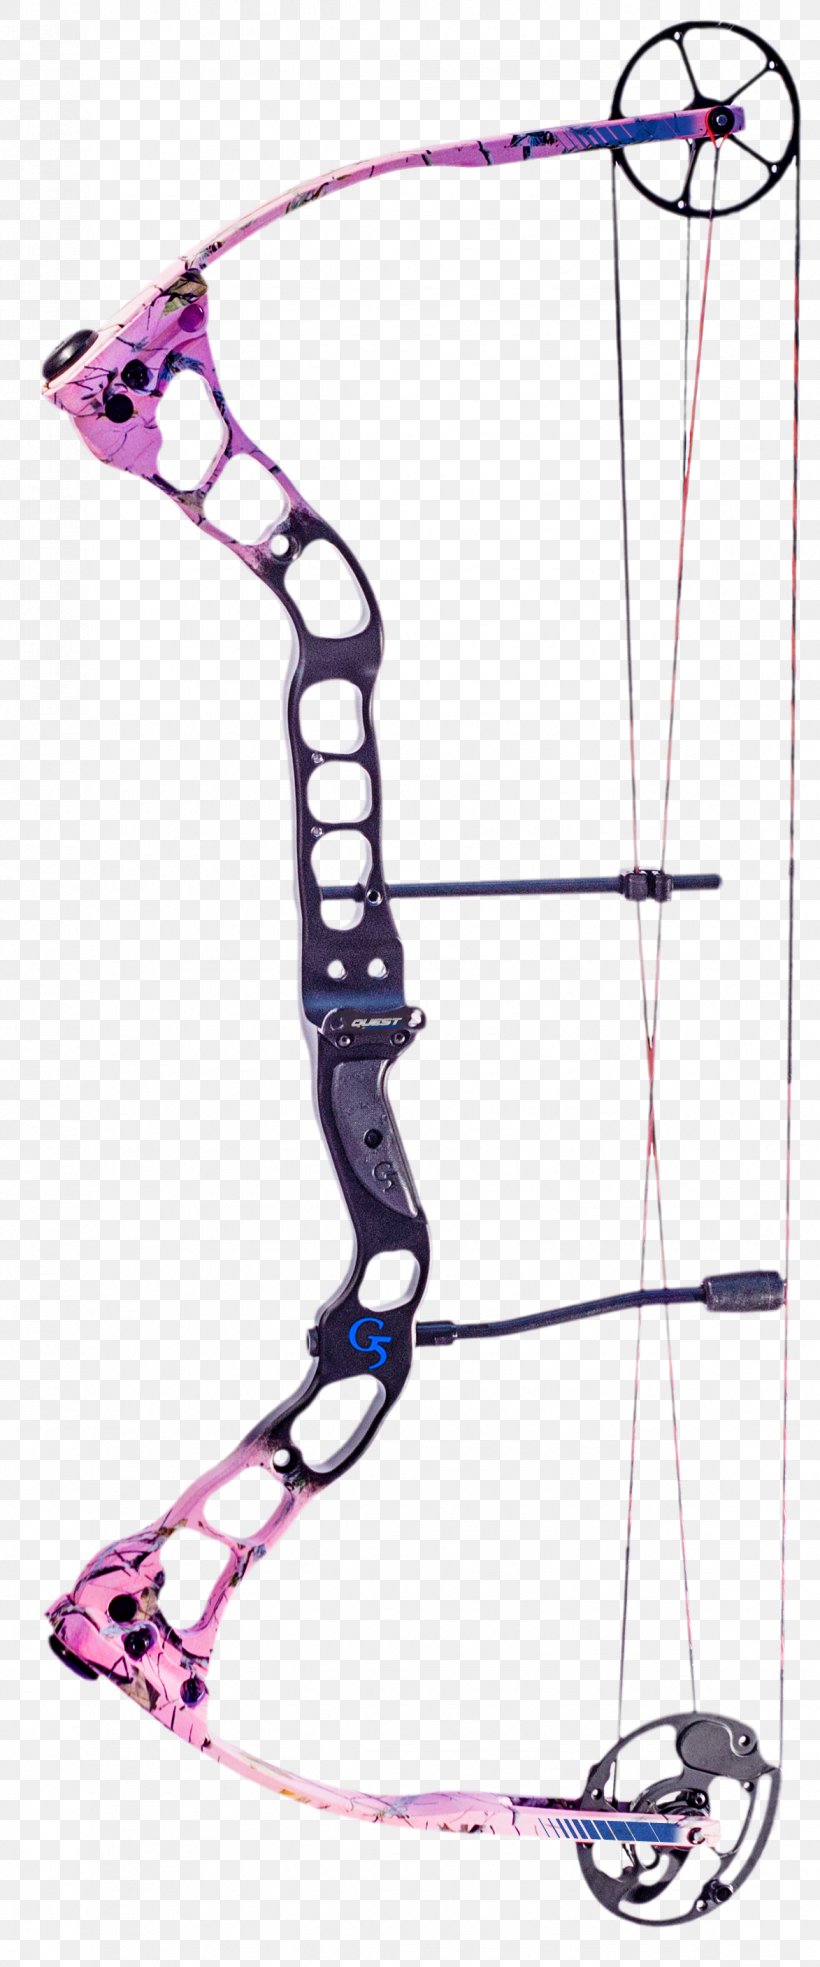 Compound Bows Bowhunting Bow And Arrow Archery, PNG, 1173x2814px, Compound Bows, Archery, Bear Archery, Bow And Arrow, Bowhunting Download Free